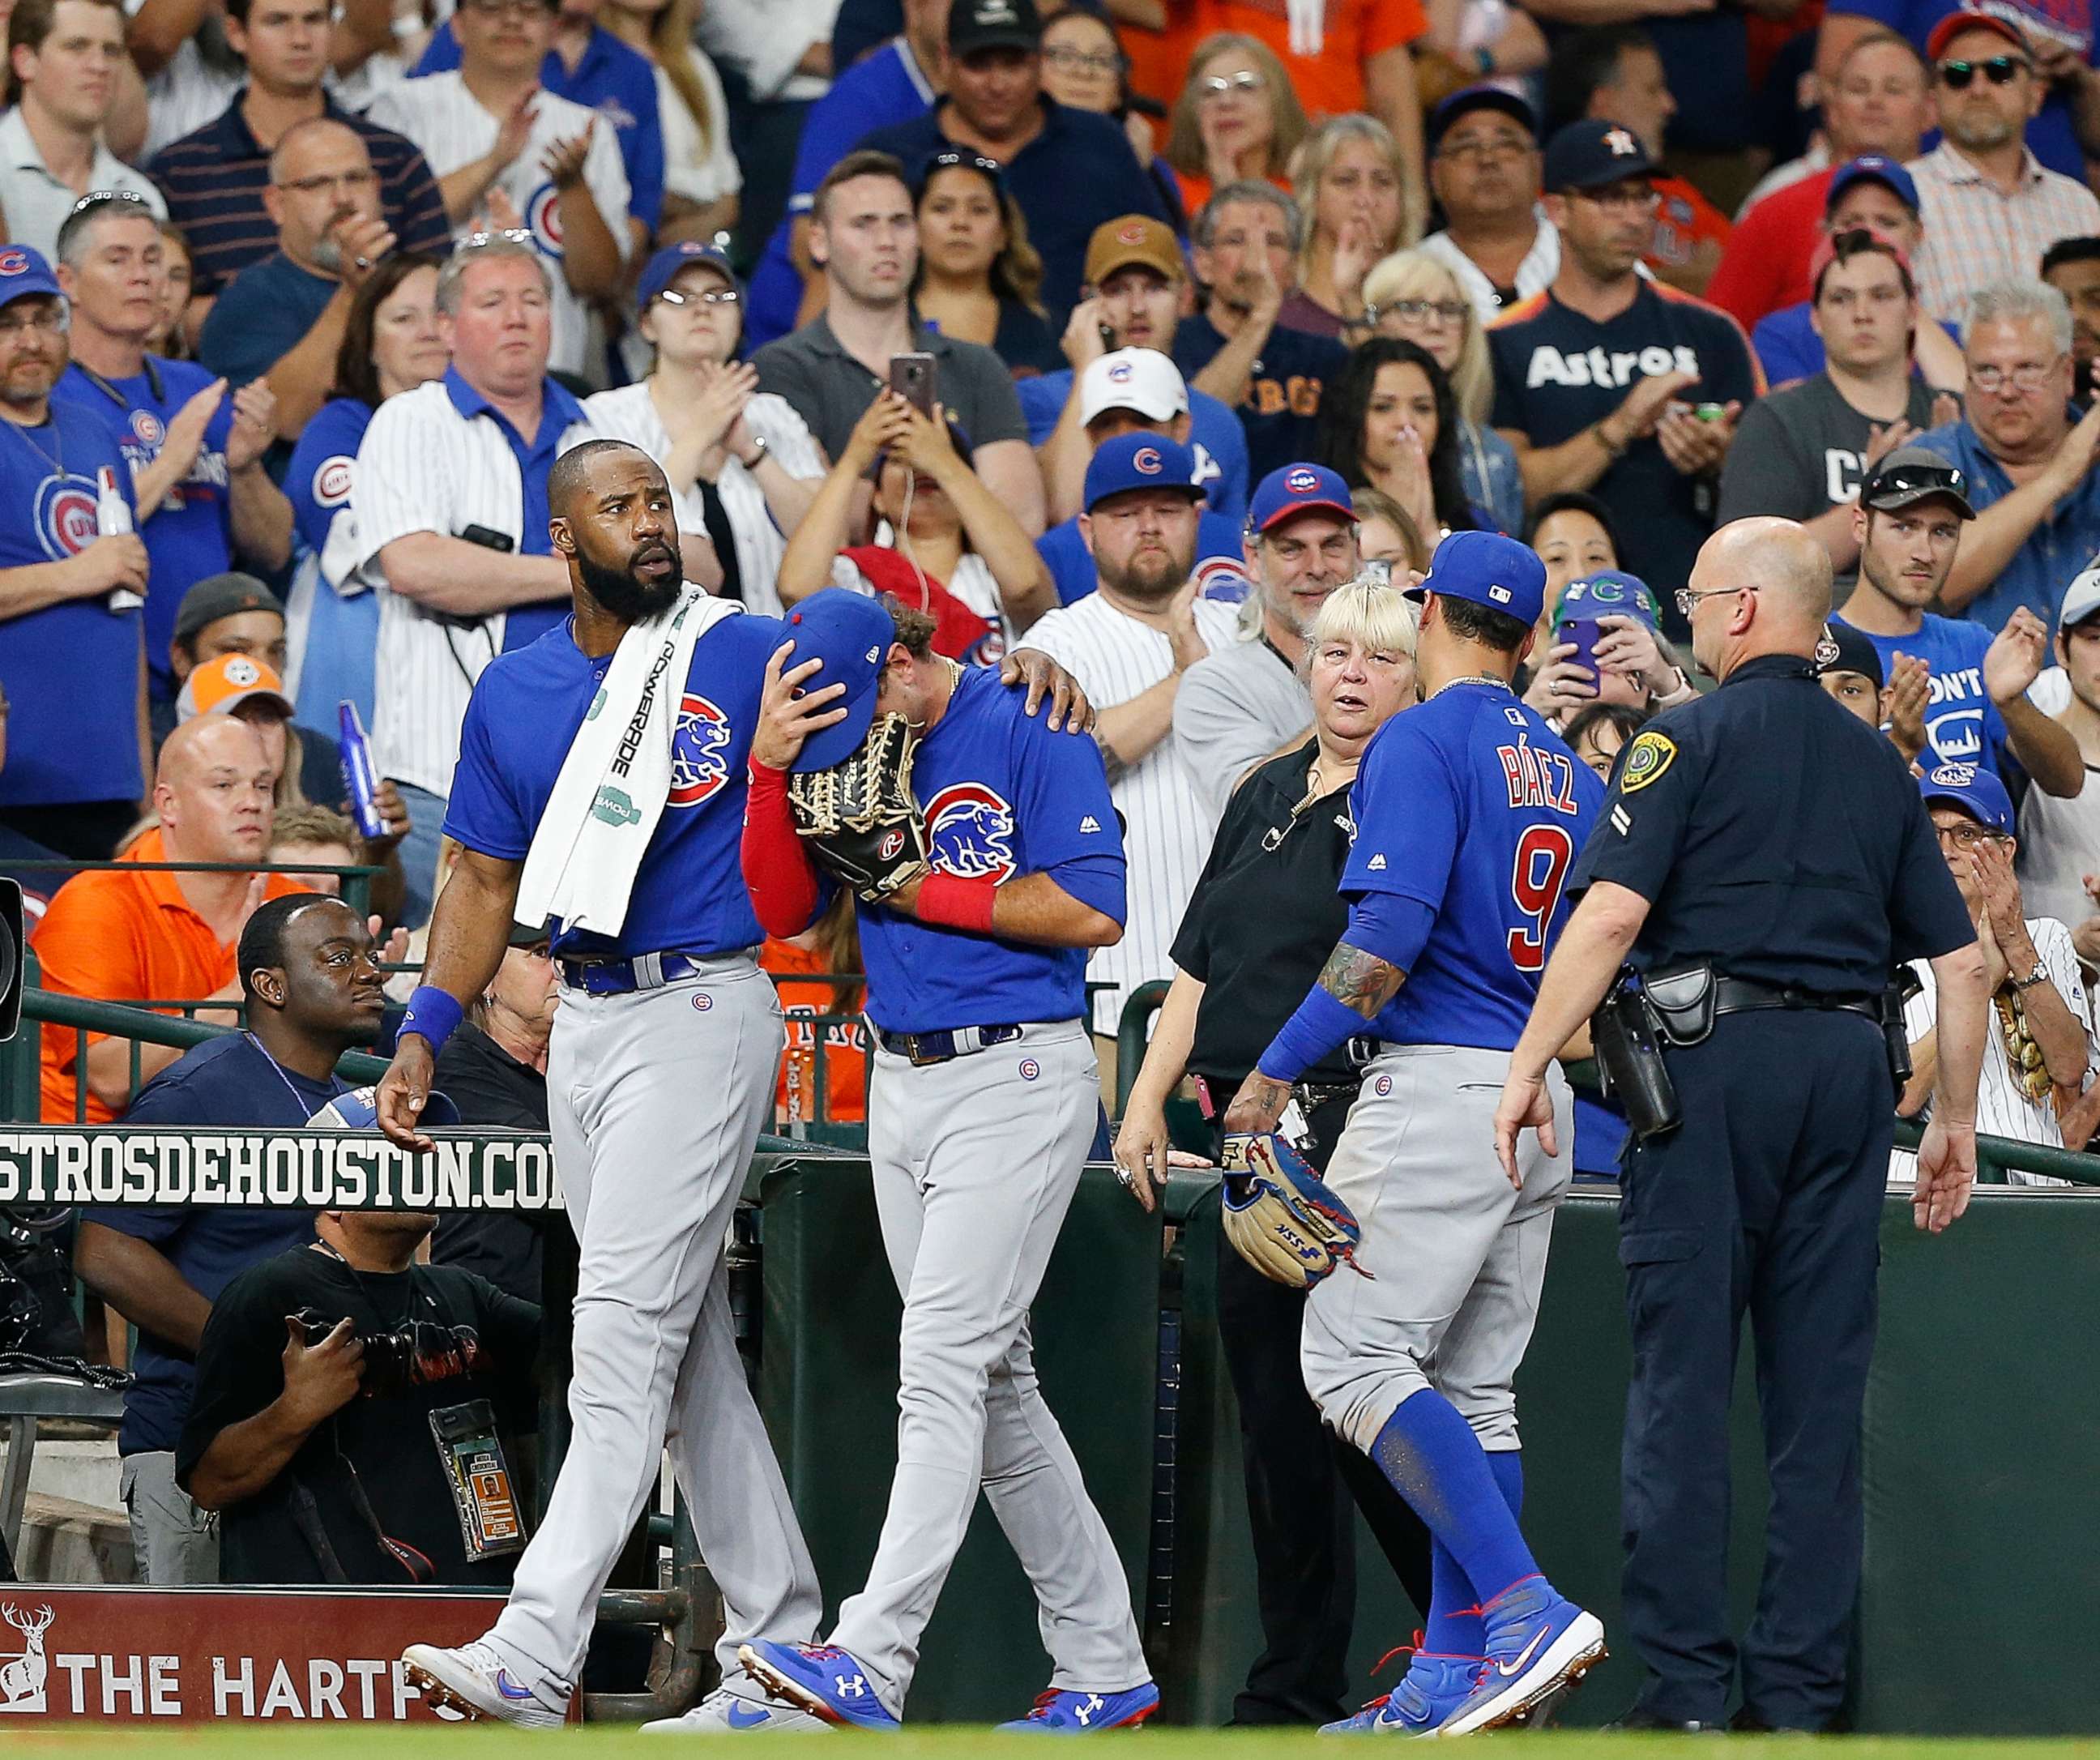 PHOTO: Albert Almora Jr. of the Chicago Cubs is comforted by Jason Heyward after checking on the young child that was injured by a hard foul ball off his bat at Minute Maid Park on May 29, 2019, in Houston.